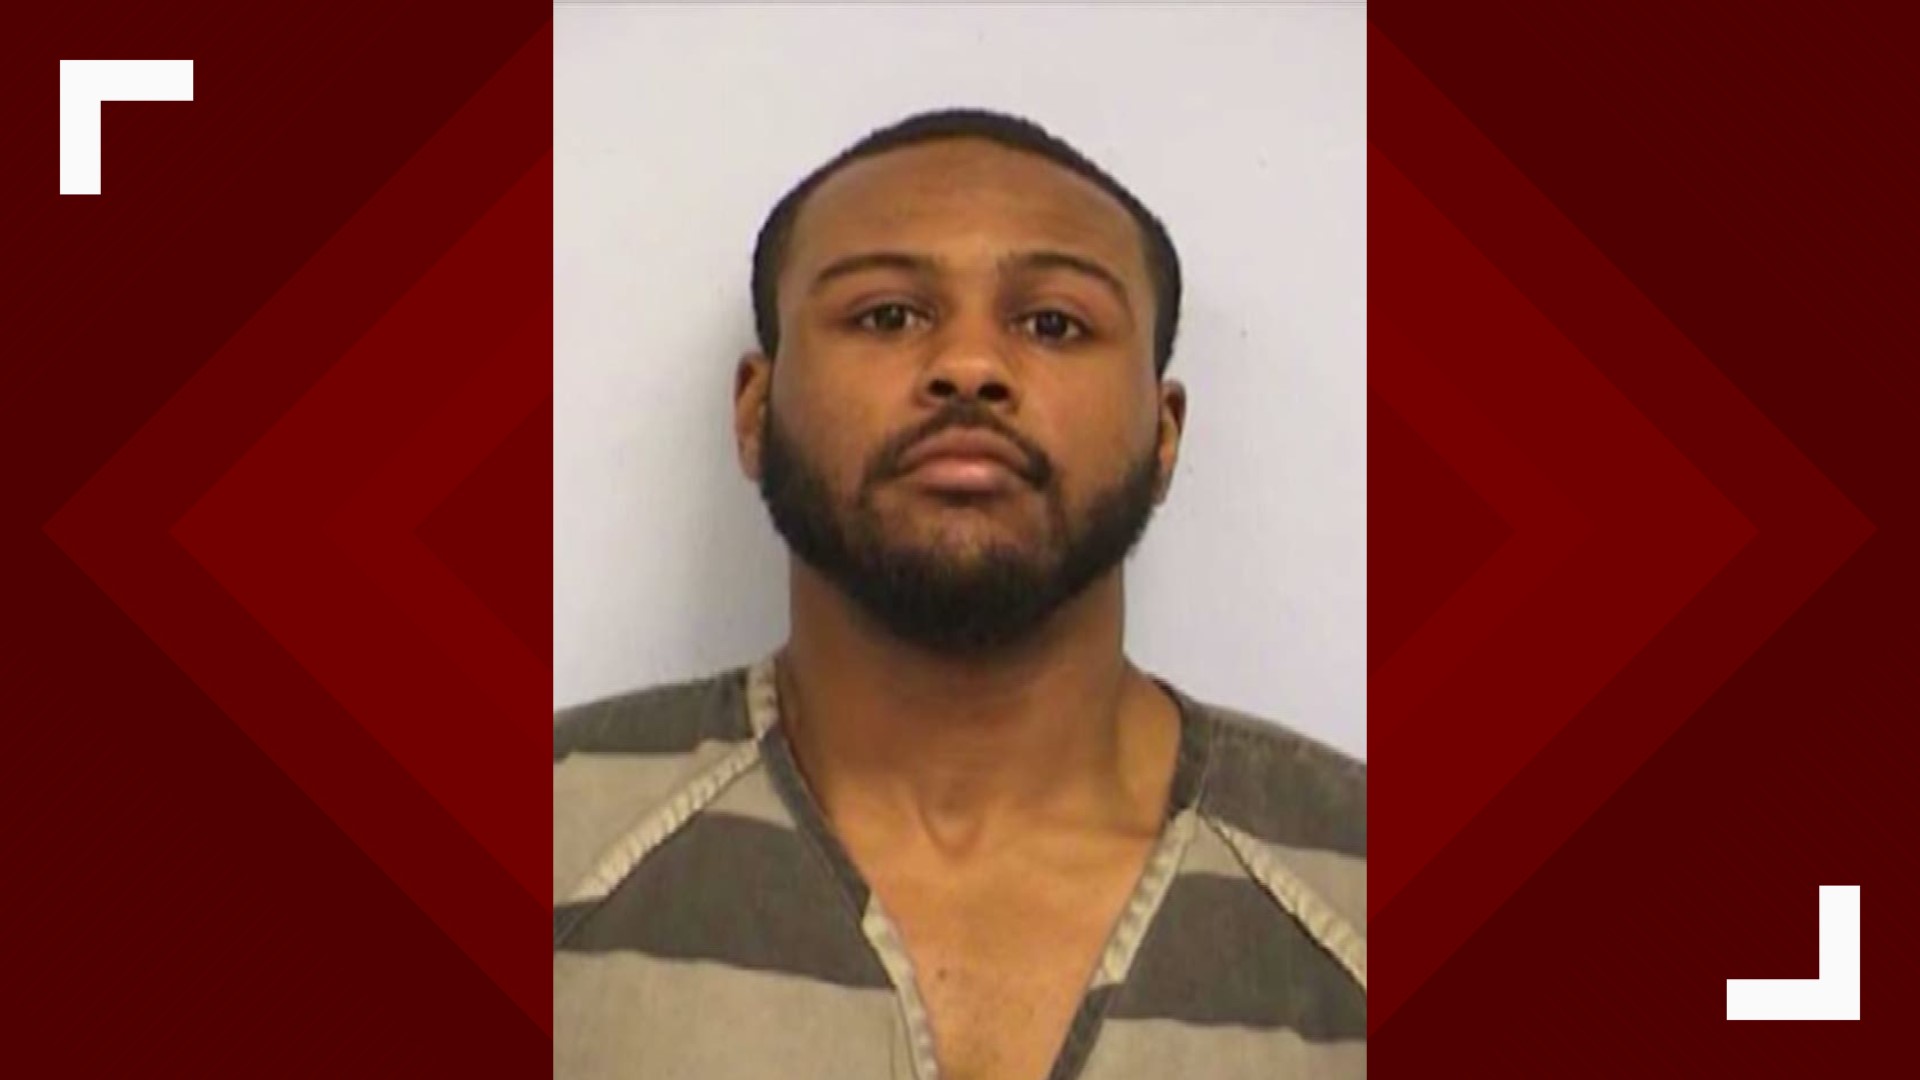 The UT student who stabbed a fellow UT student to death isn't going to prison for his crime.